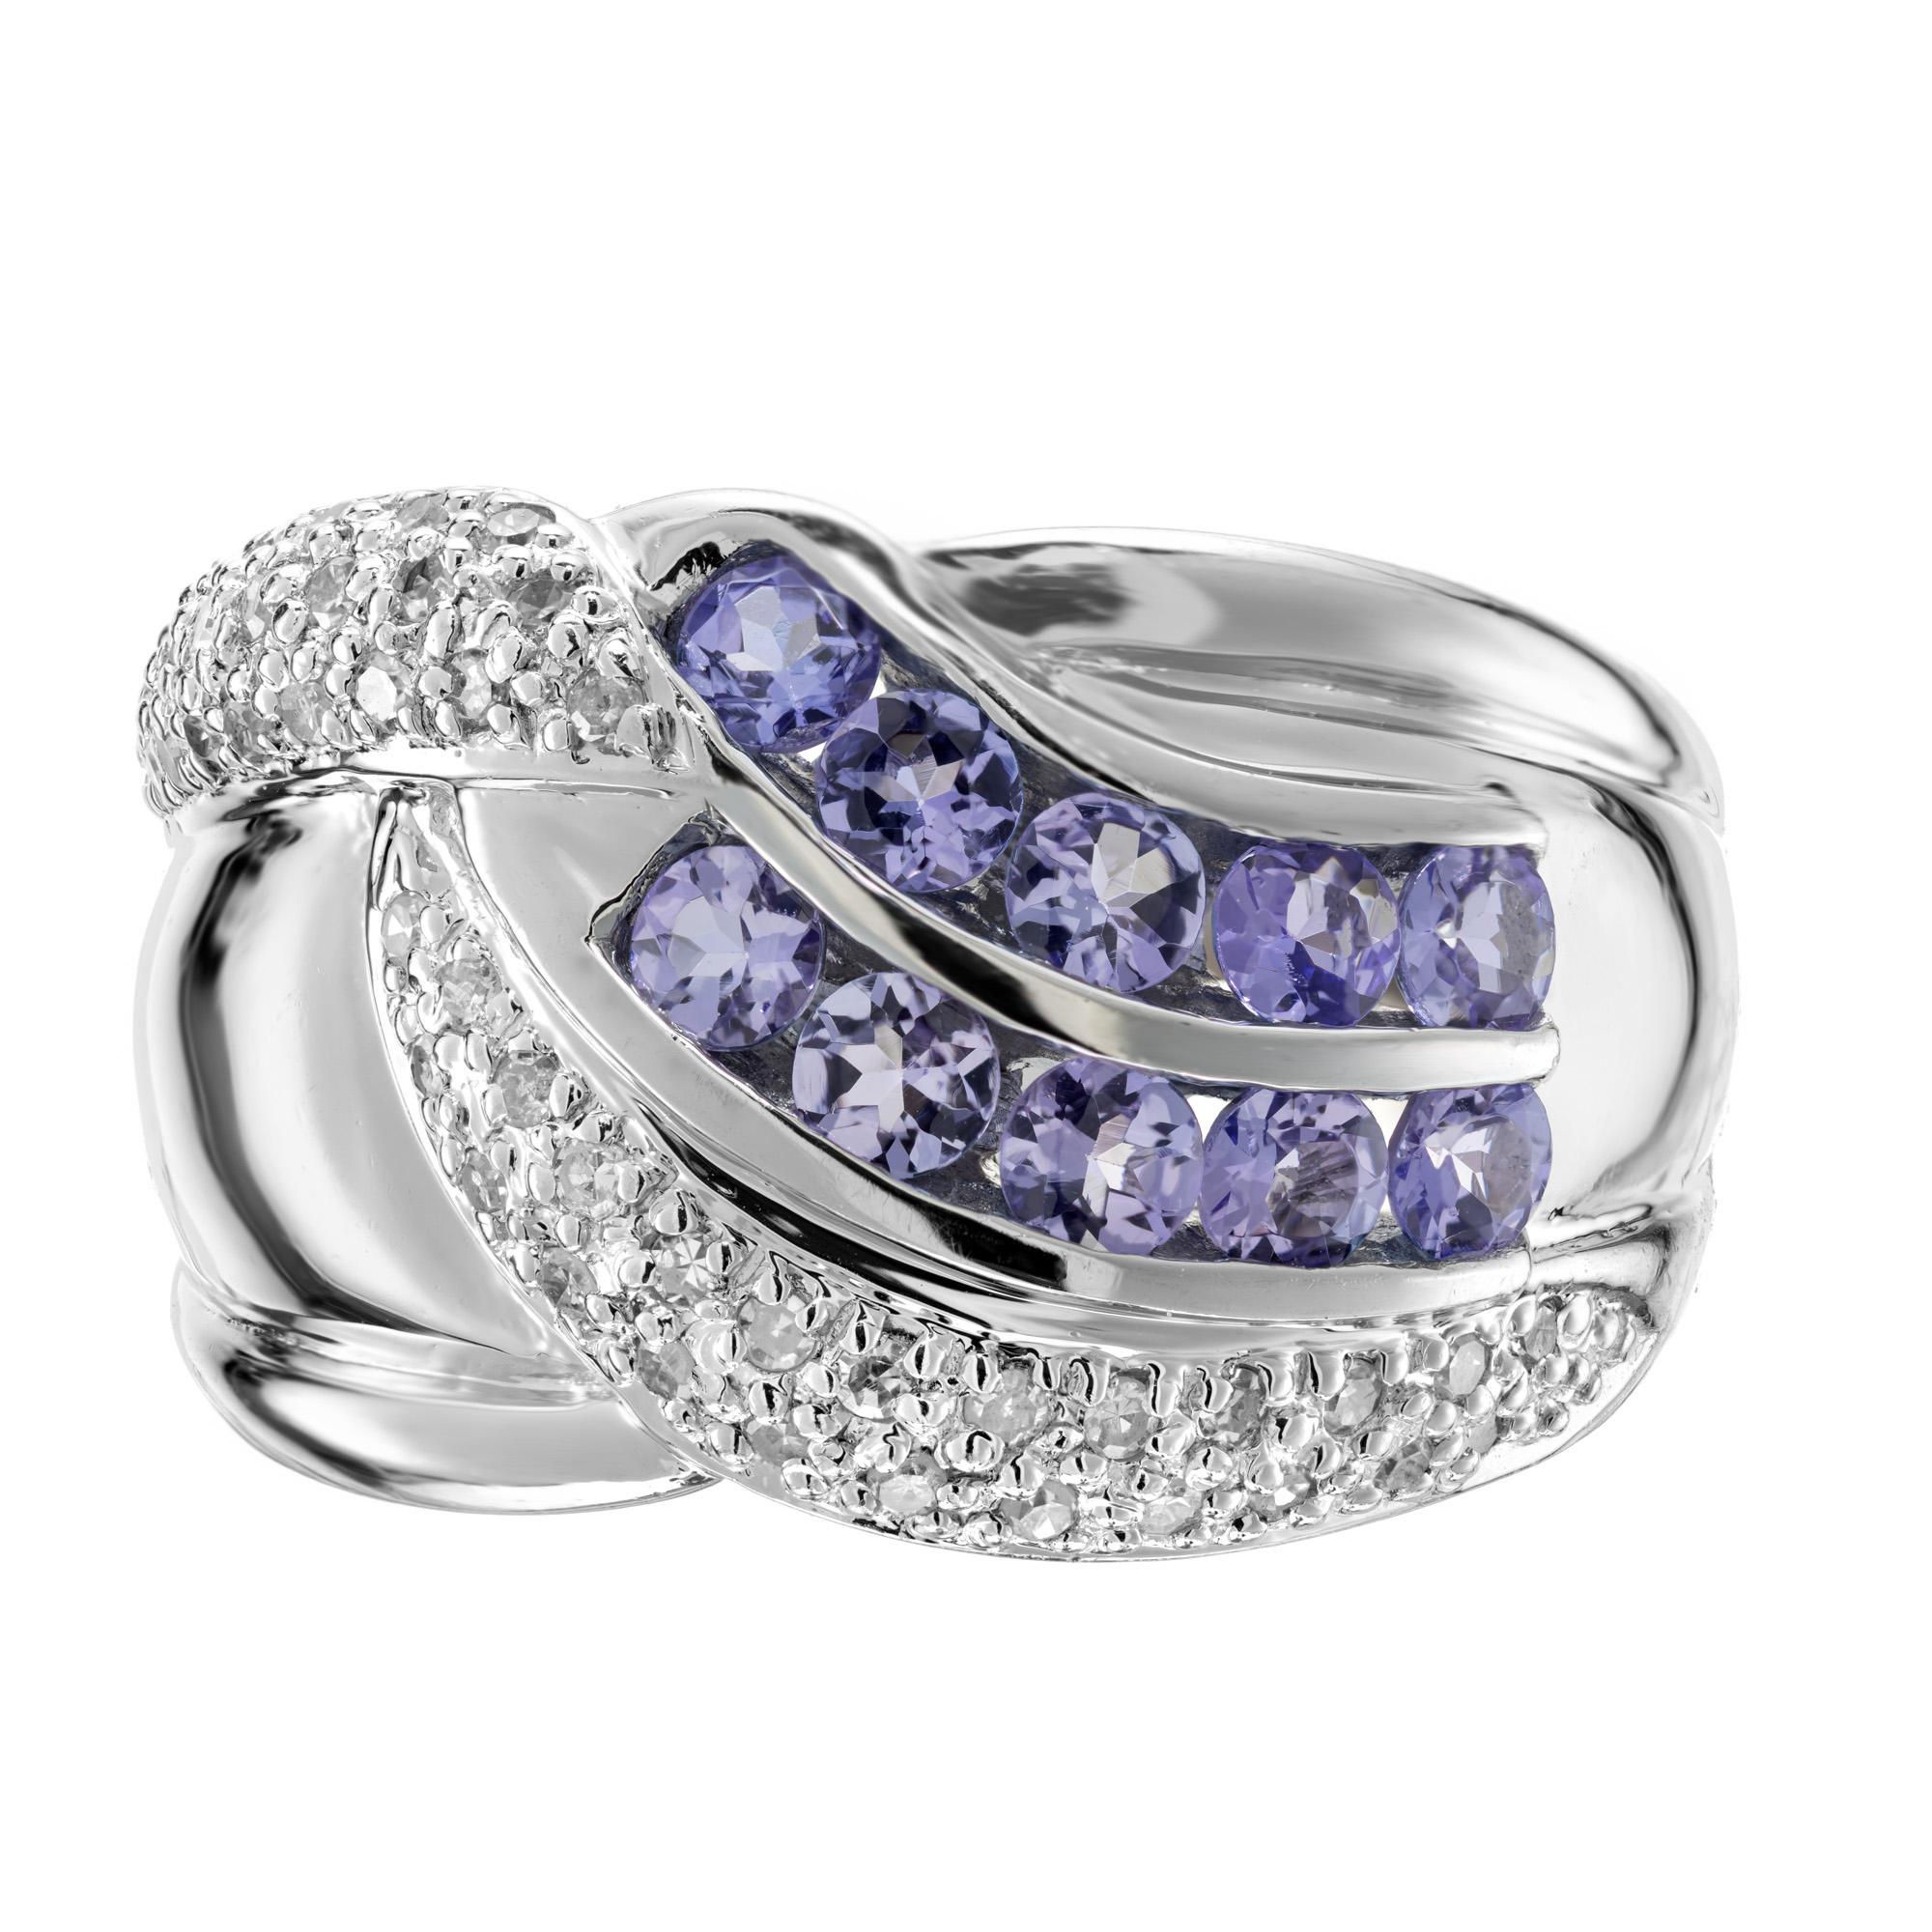 1990's Tanzanite and diamond cocktail band ring. 10 round cut purple tanzanite gemstones totaling 1.20cts, mounted in two rows and accented with 44 round pave set diamonds. At its widest point, this ring is a little over .56 inches across the top.